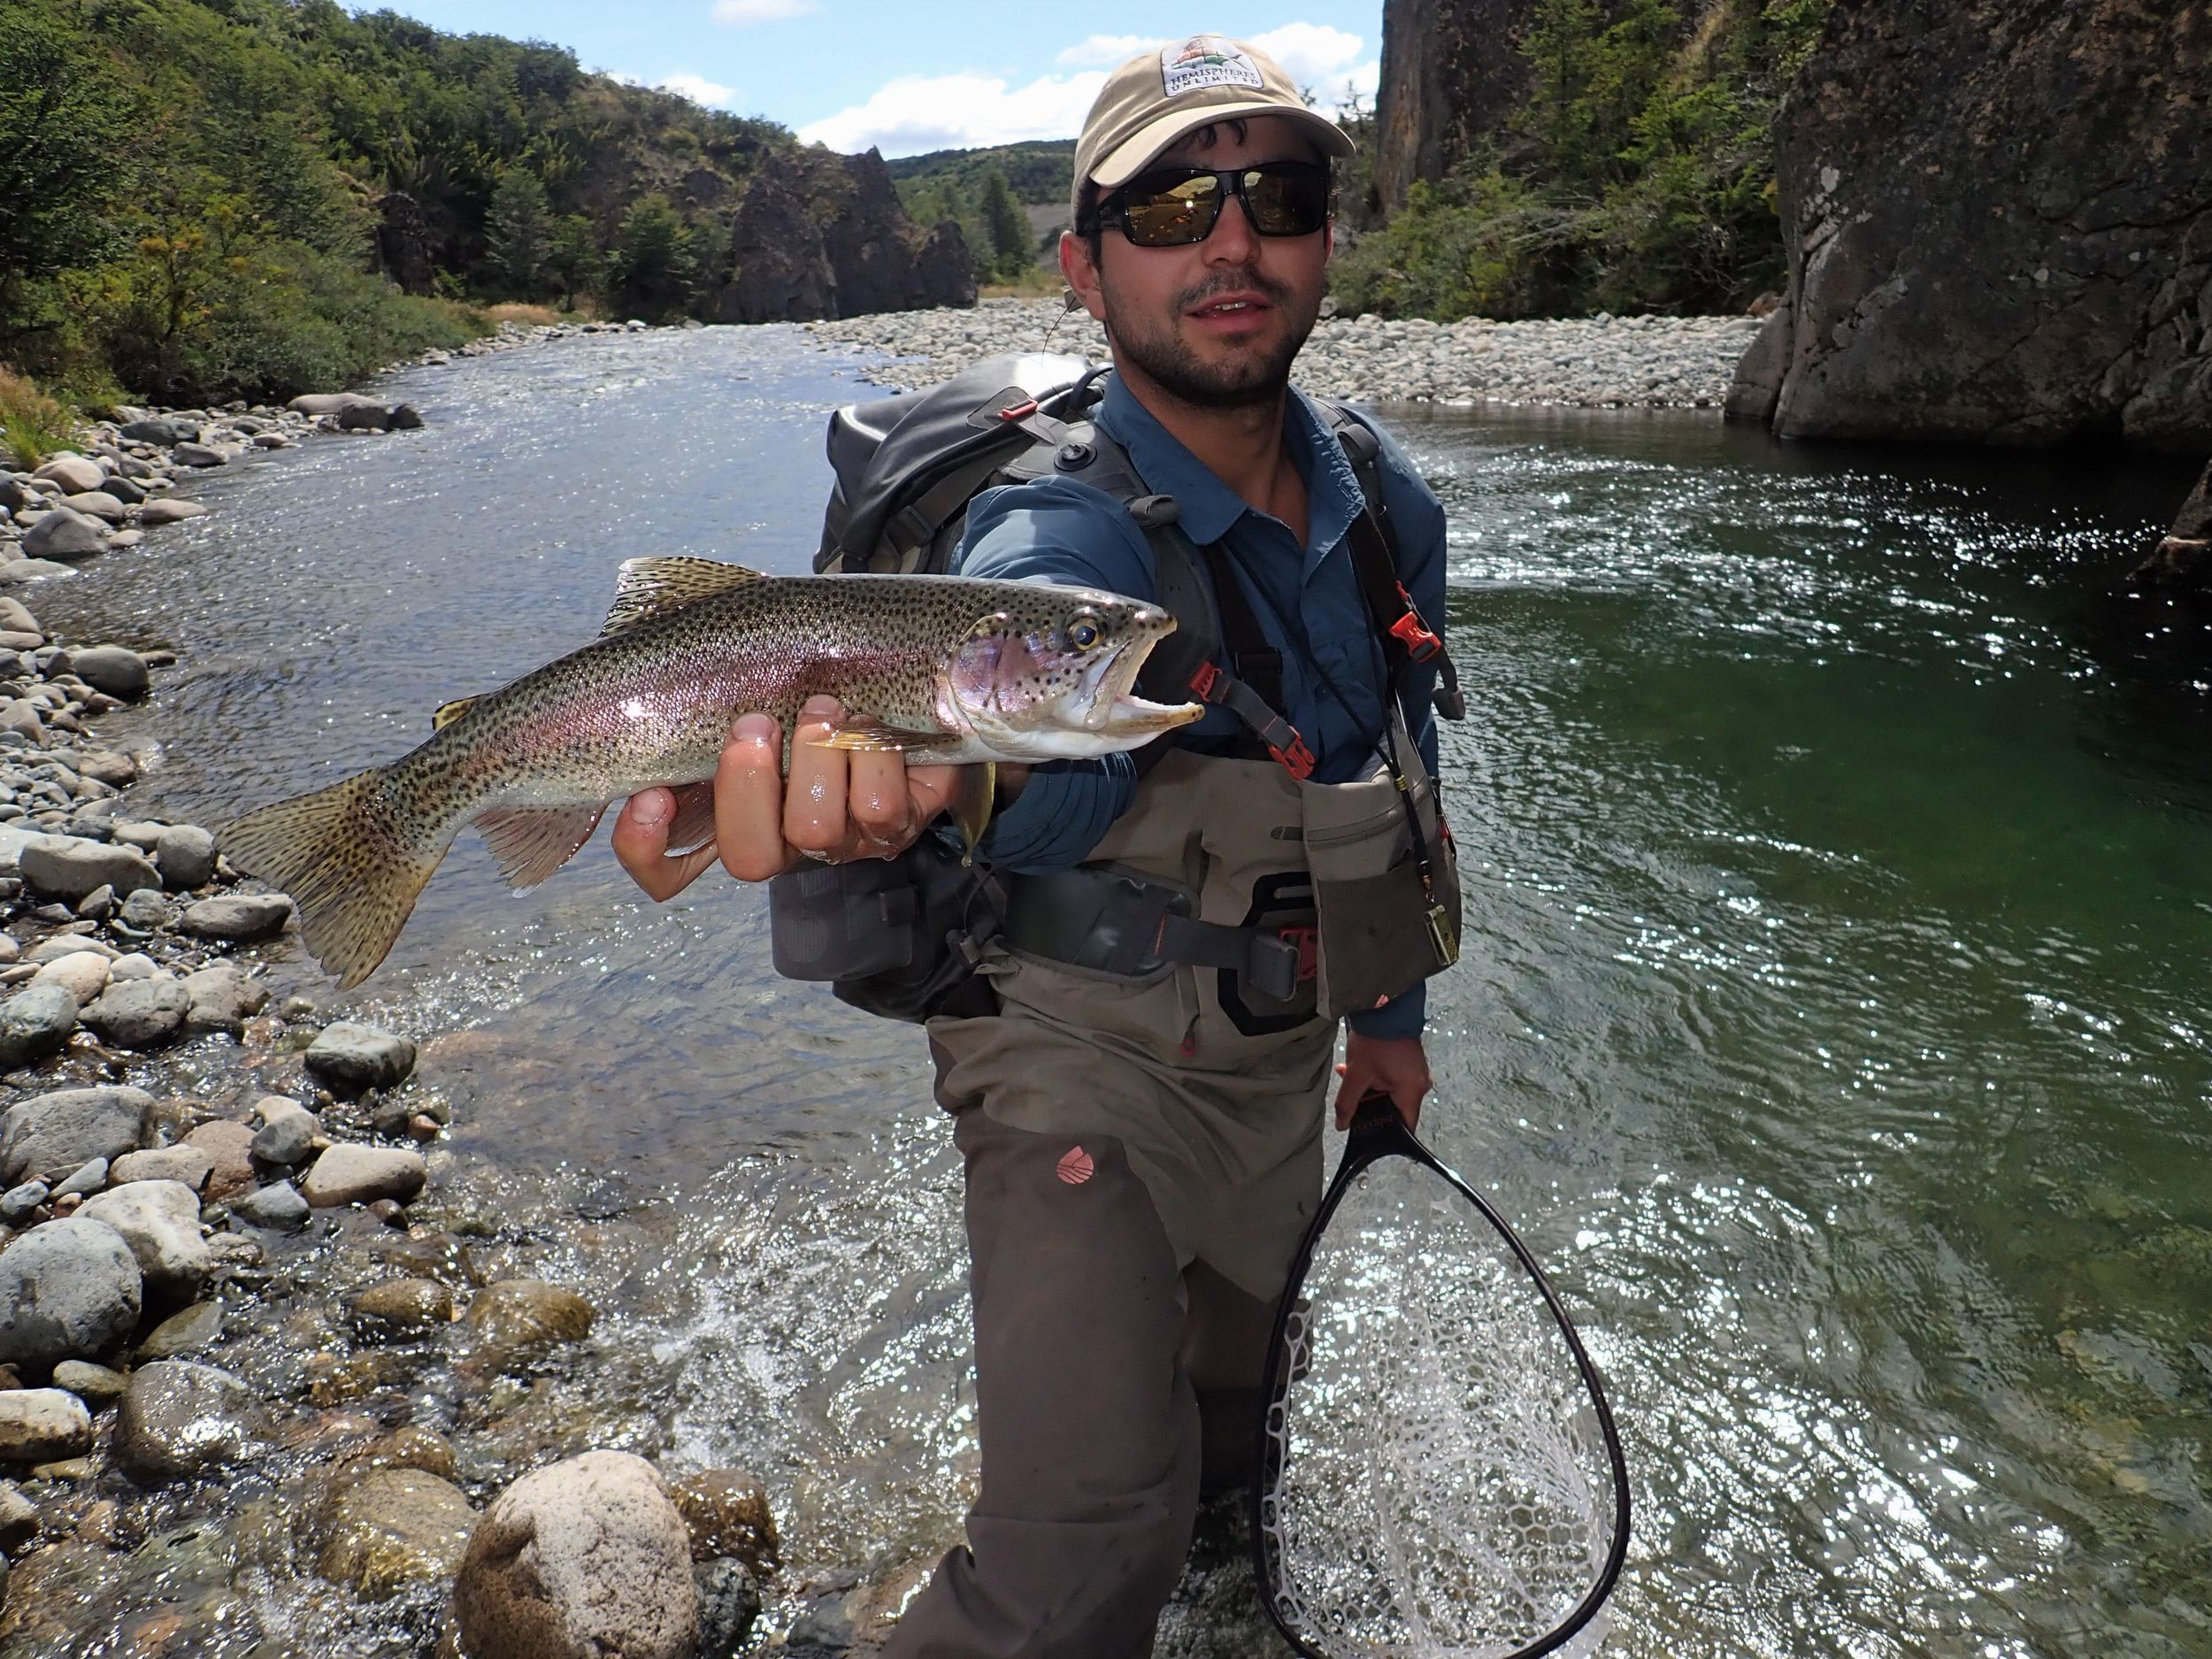 Local anglers find Trout Bum nirvana in Argentina